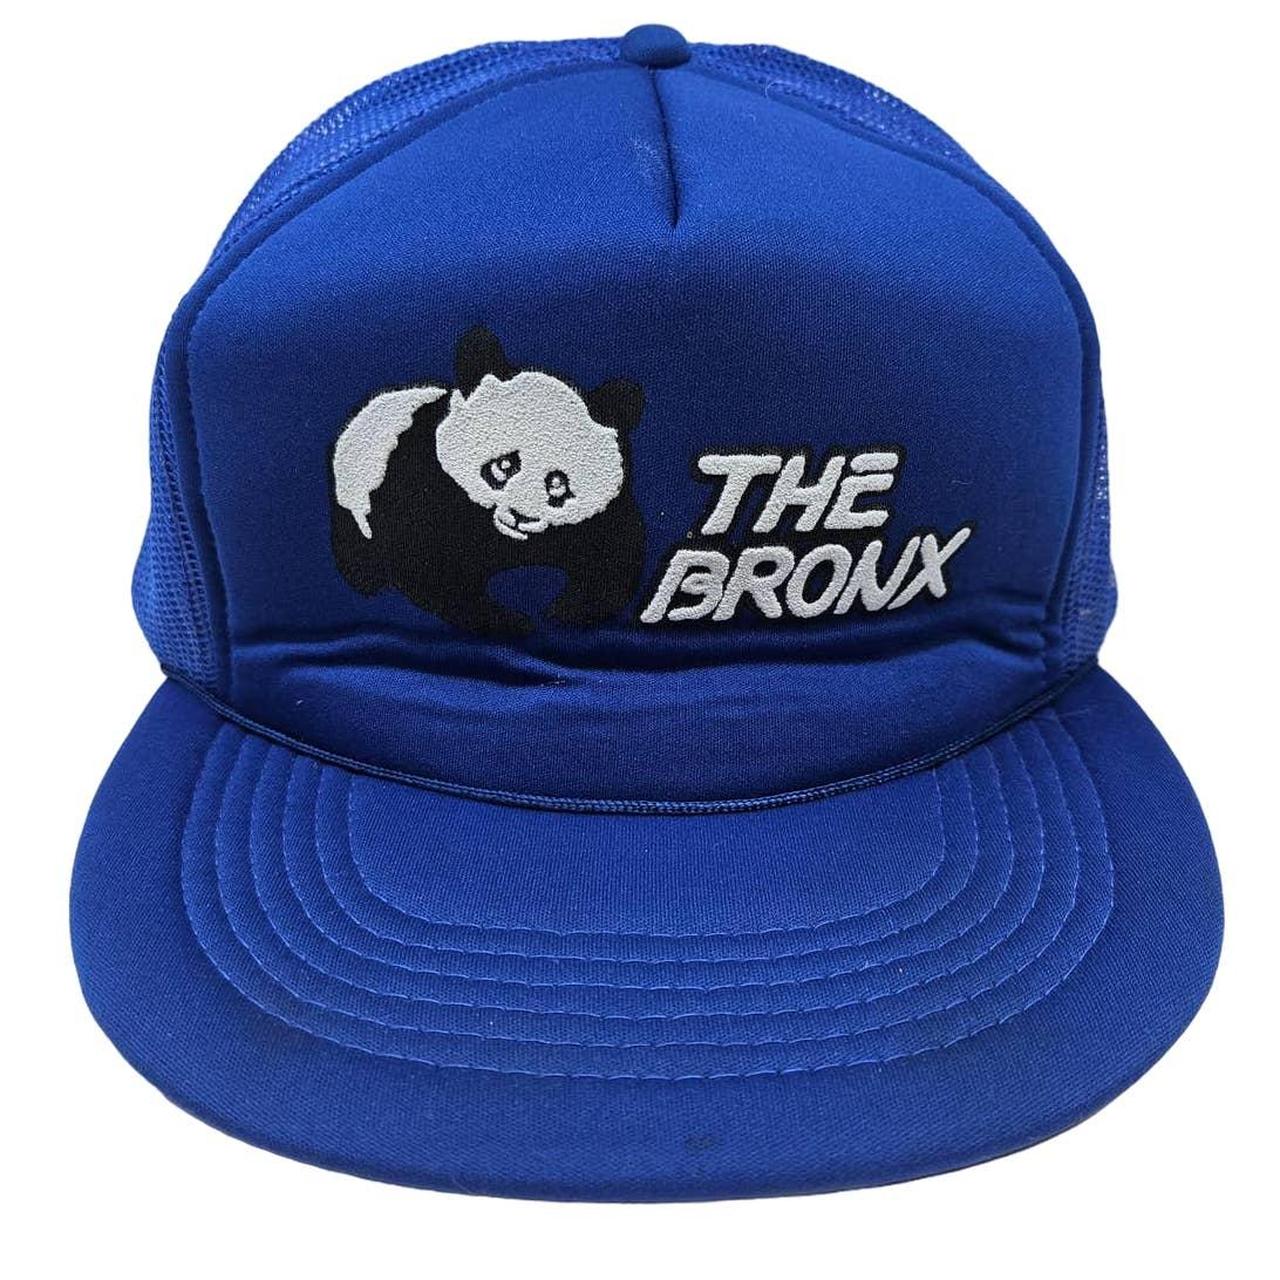 In great condition Vintage 90s The Bronx New York...